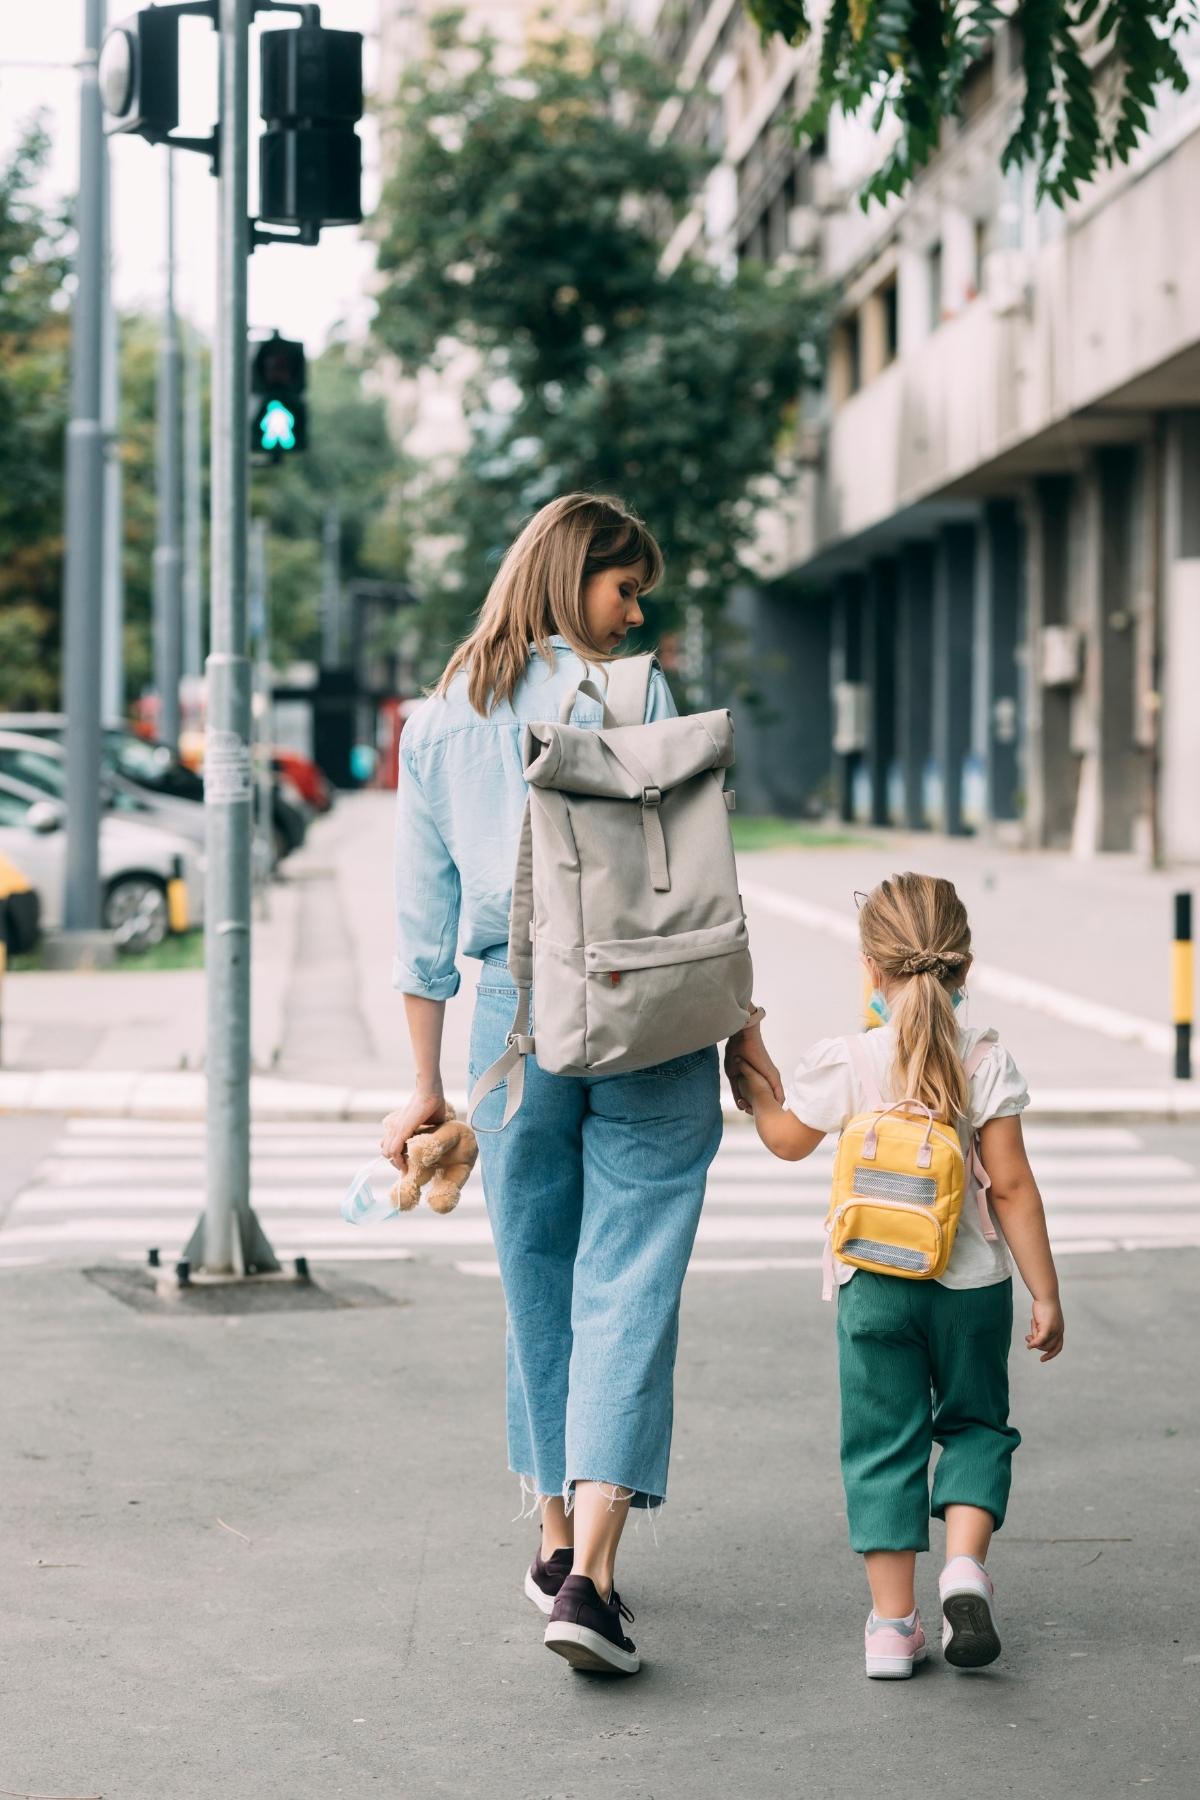 Explore your child's thoughts and emotions on their first day of school with our engaging and insightful questions. These 25 Questions to Ask Your Kids on their First Day of School are designed to promote deep conversations and strengthen parent-child bonds.